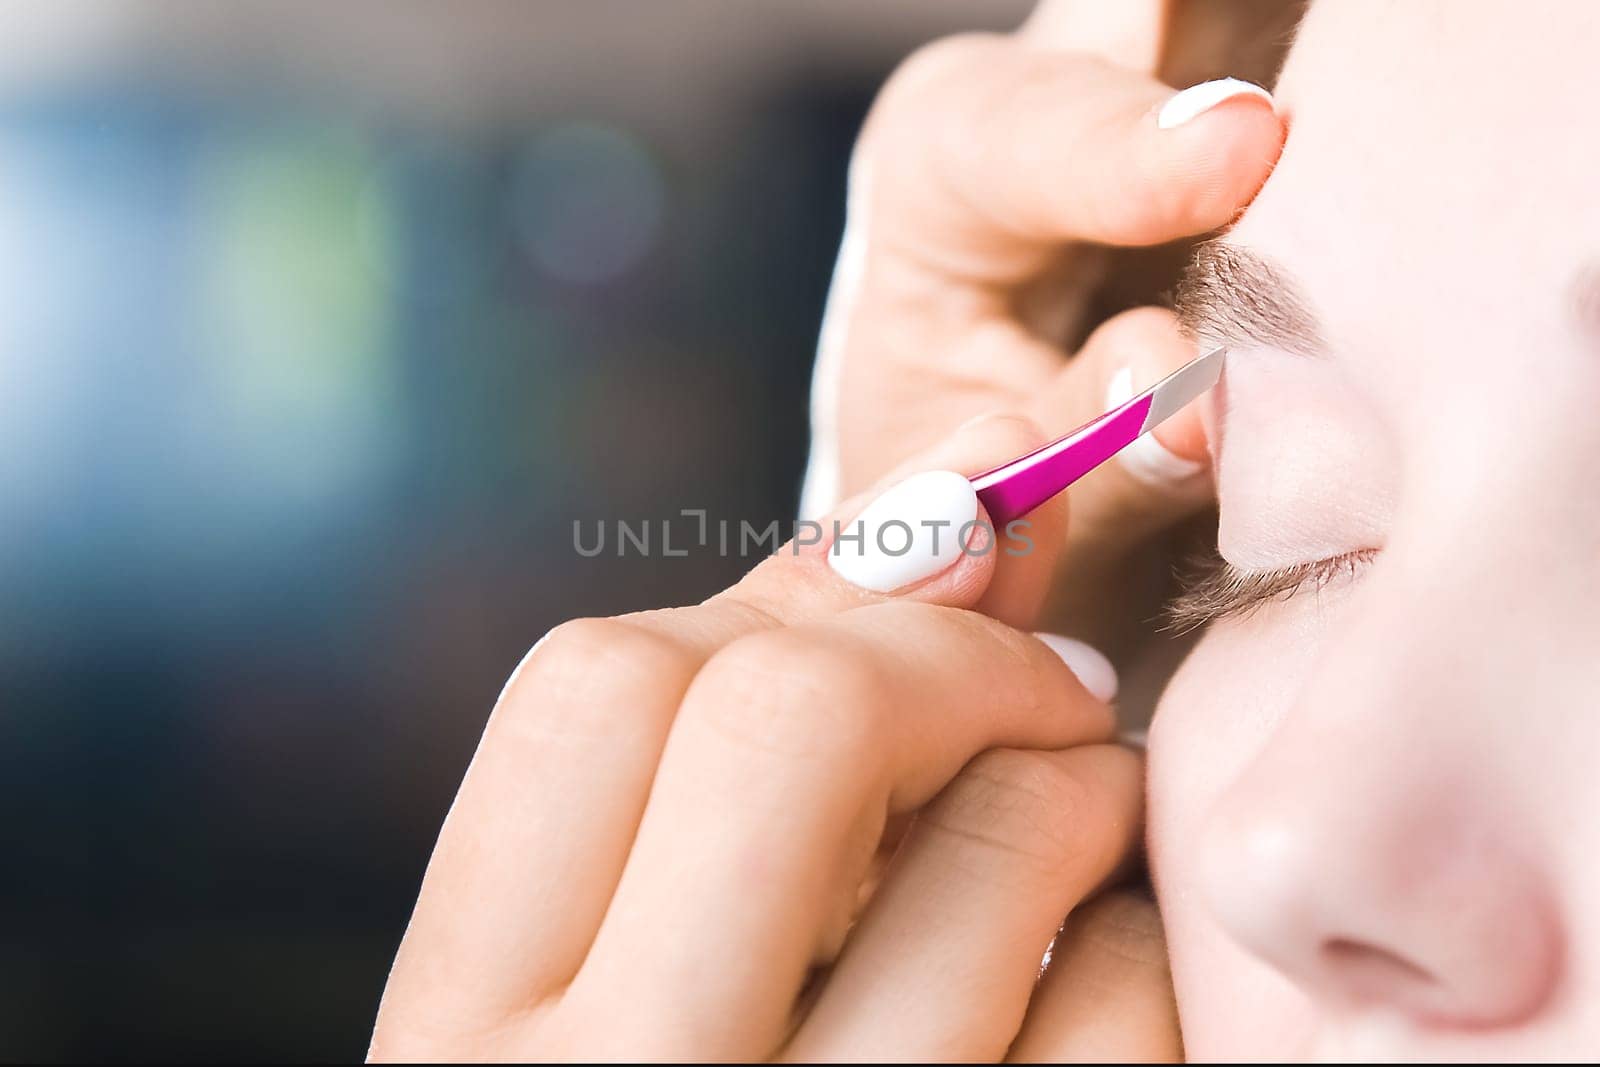 Extreme close-up of a young woman plucking eyebrow hair with tweezers in a beauty salon.